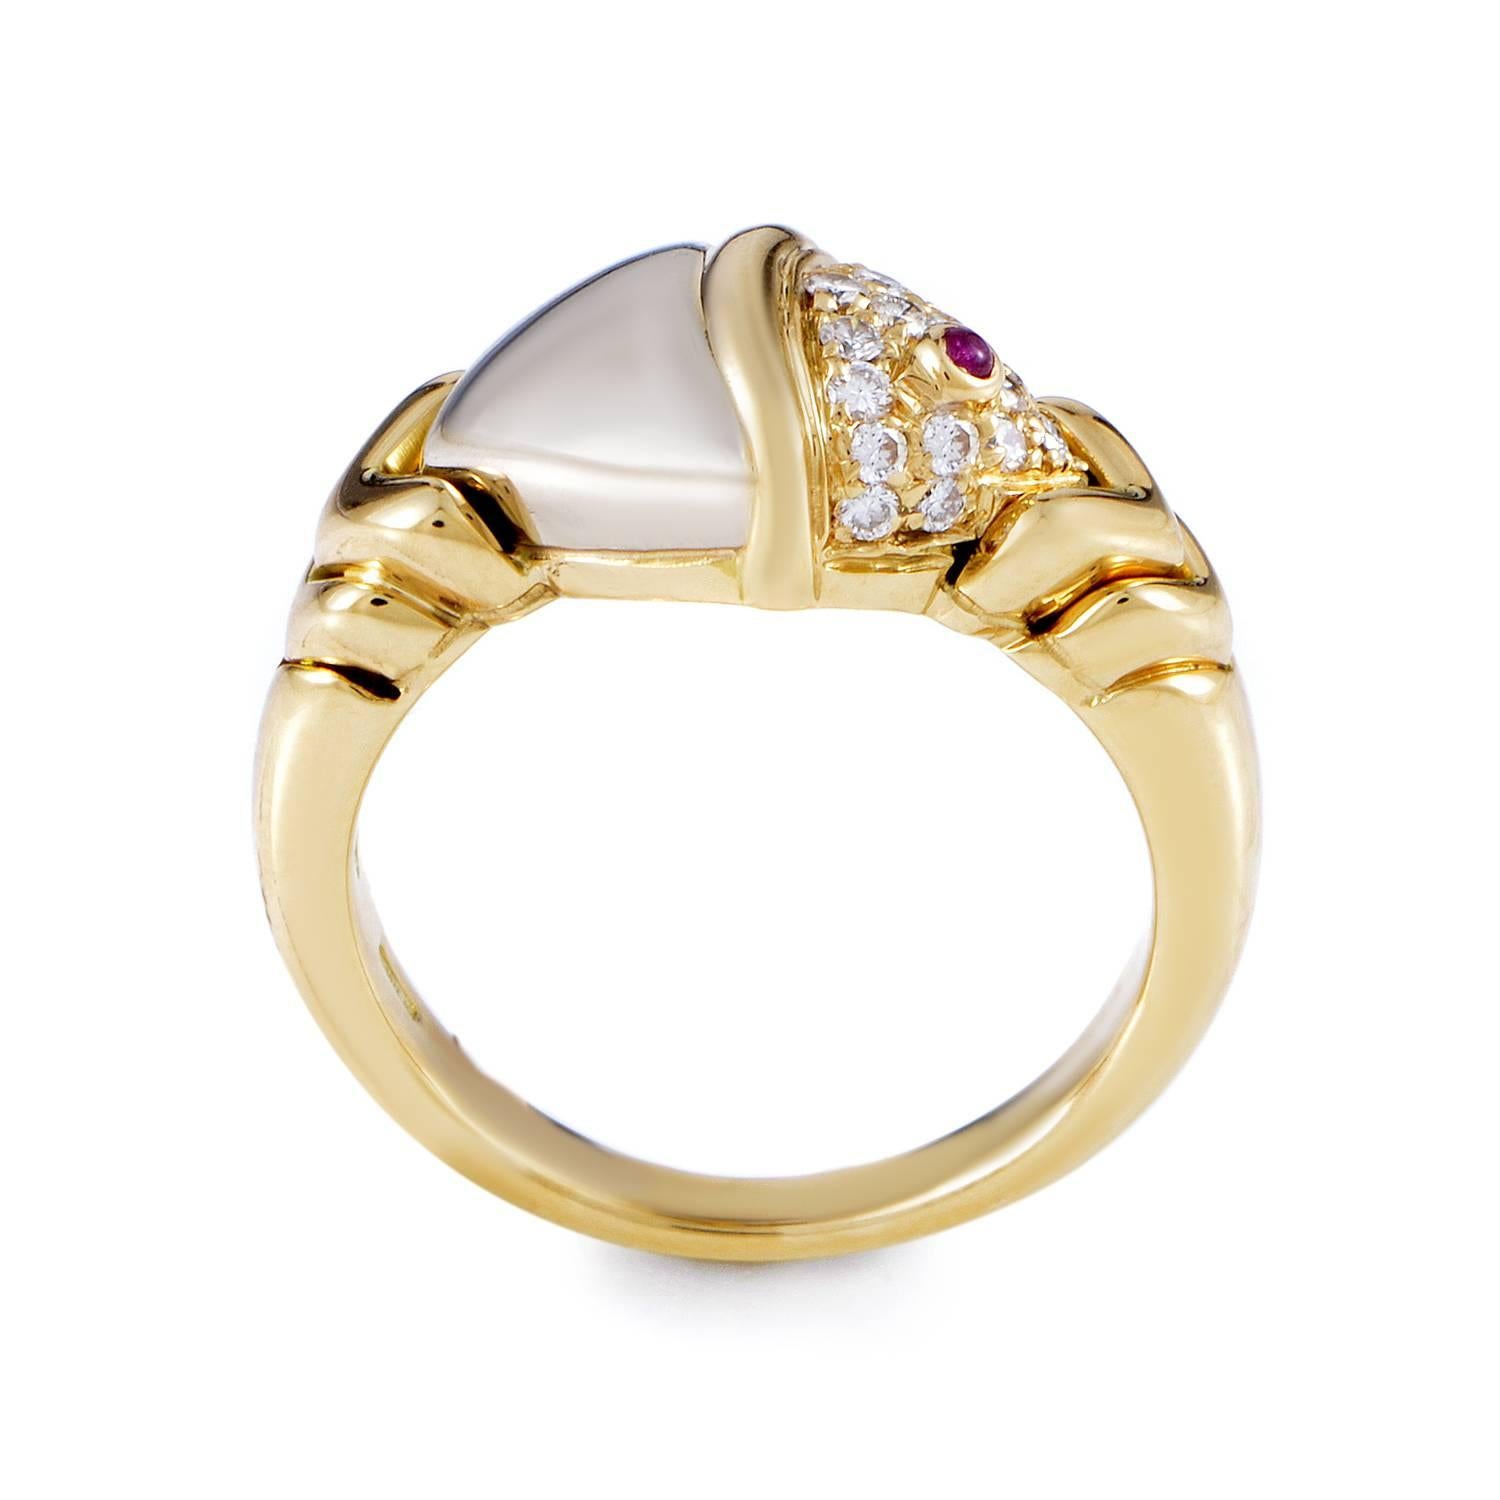 From a classically shaped body emerges extraordinary décor, with the warm tone of 18K yellow gold given a cool shimmering twist in the form of 18K white gold and embellished with 0.30ct of glistening diamonds among which a single ruby exudes its